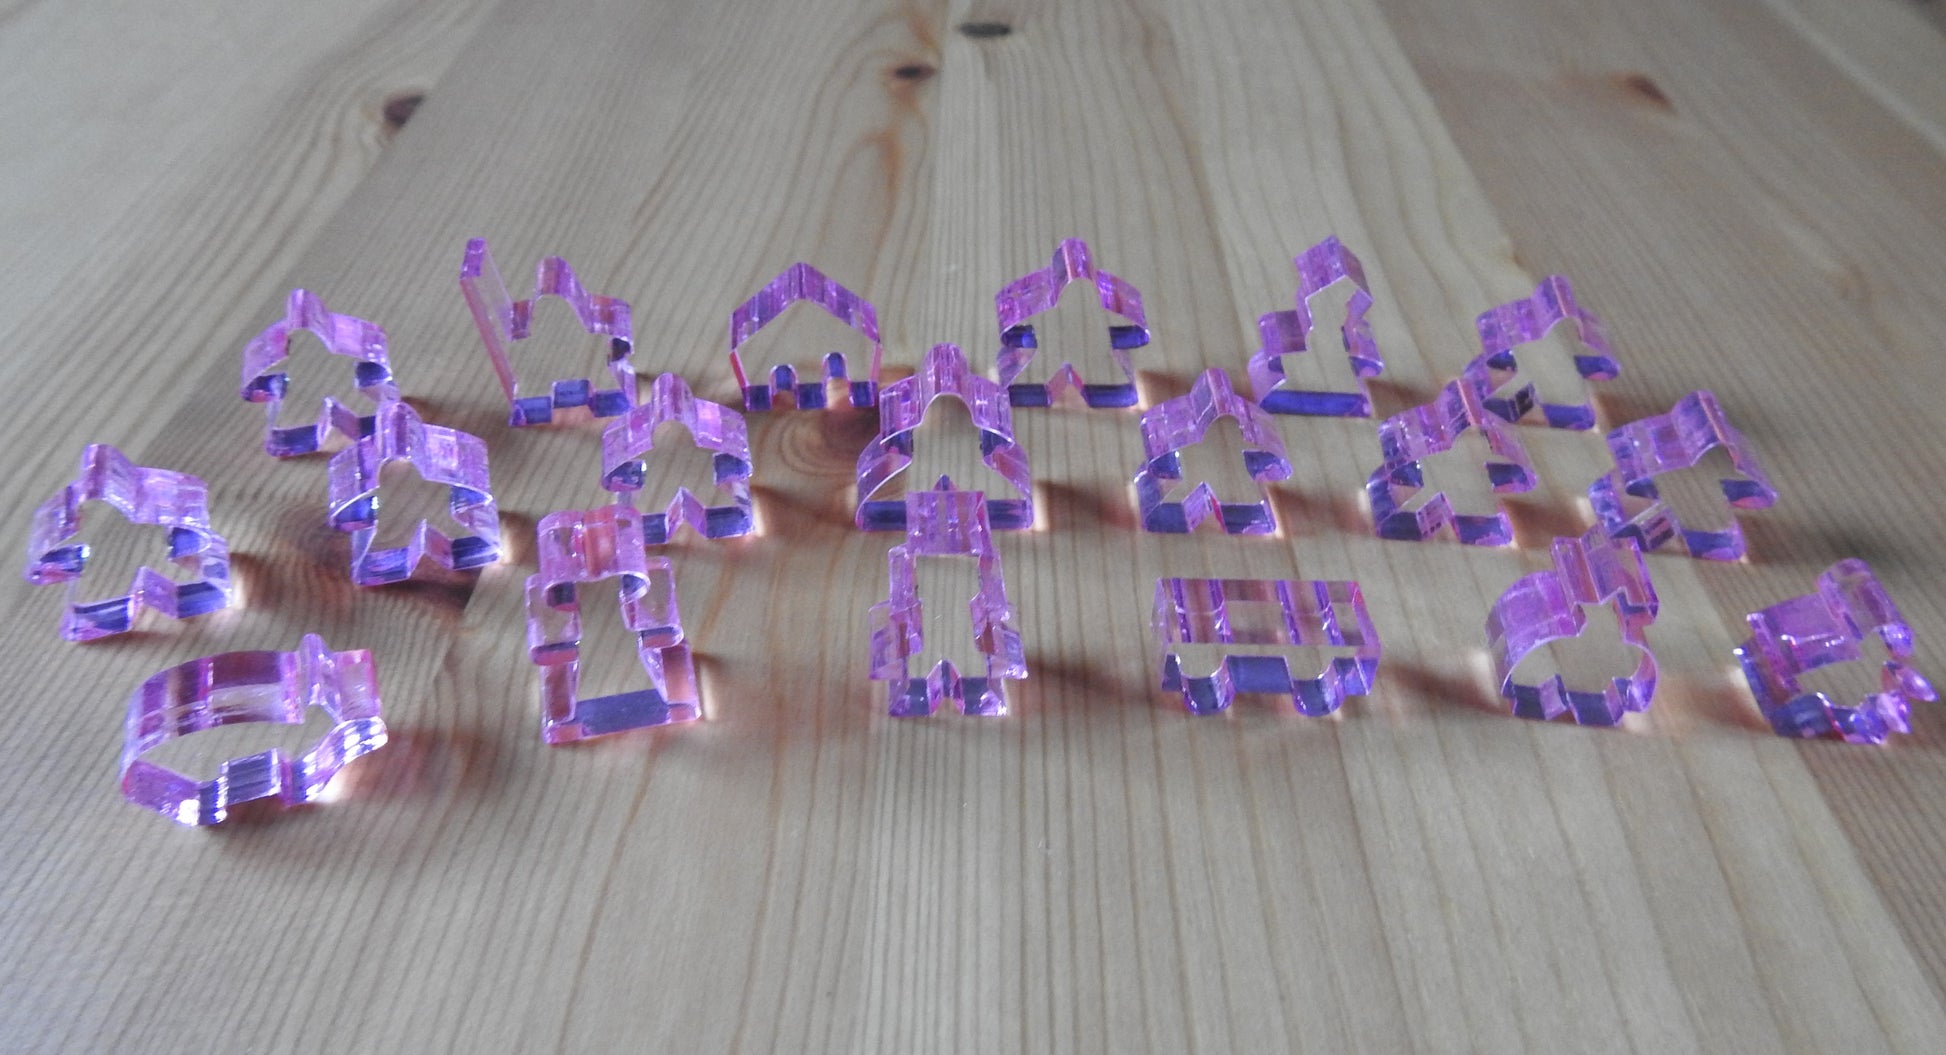 Close-up view of the pink transparent meeple set.